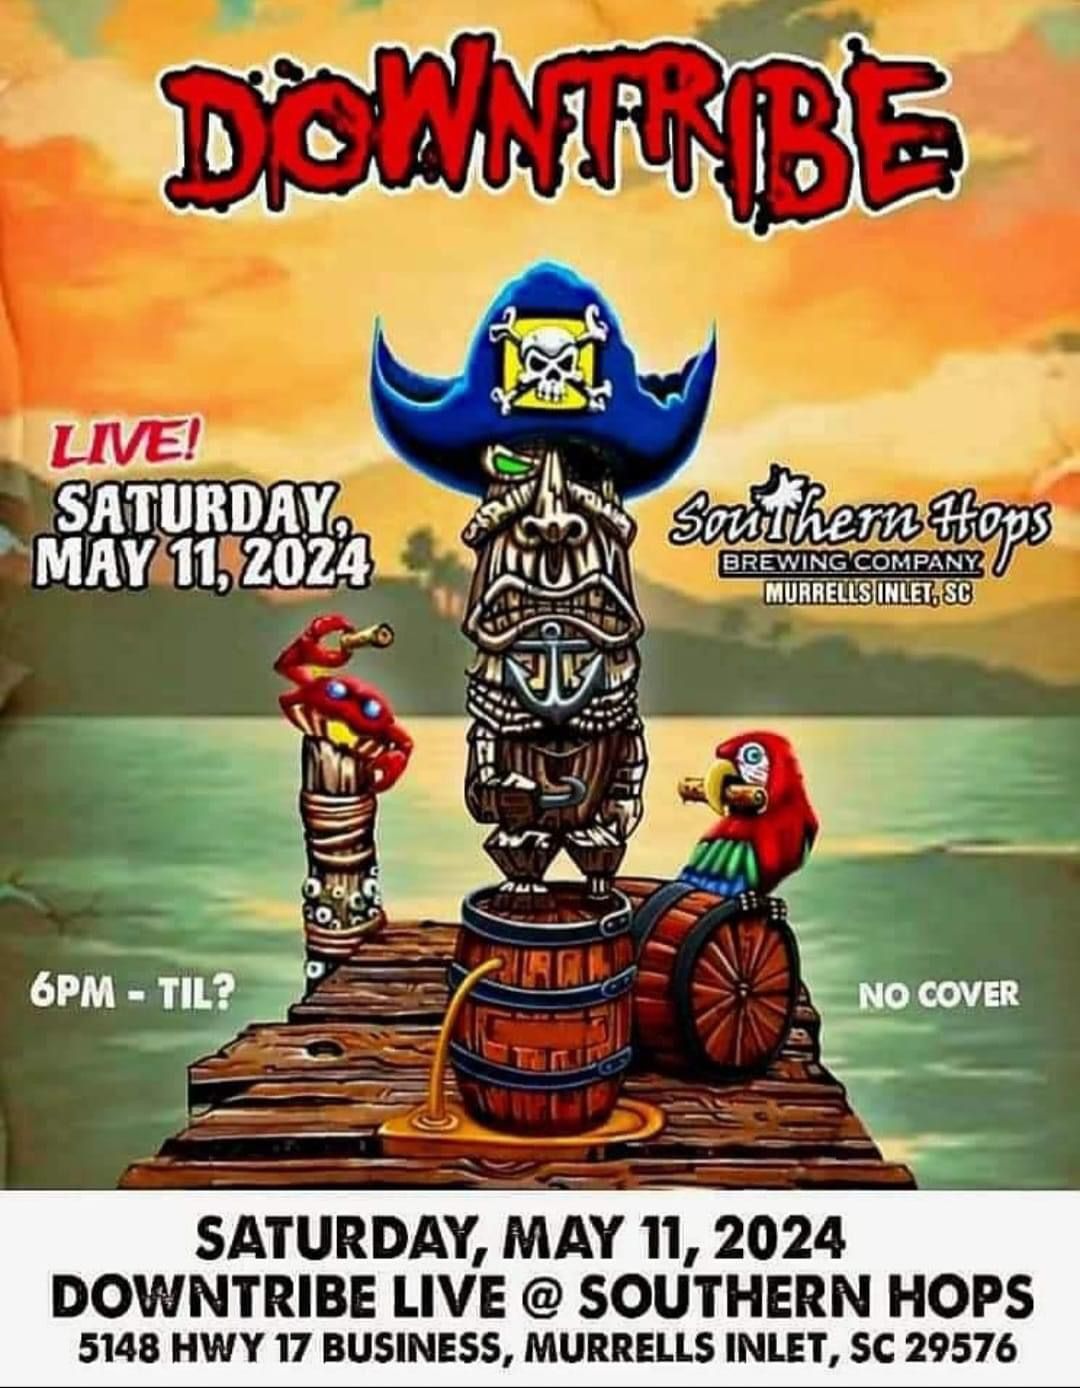 Second Saturday with Downtribe